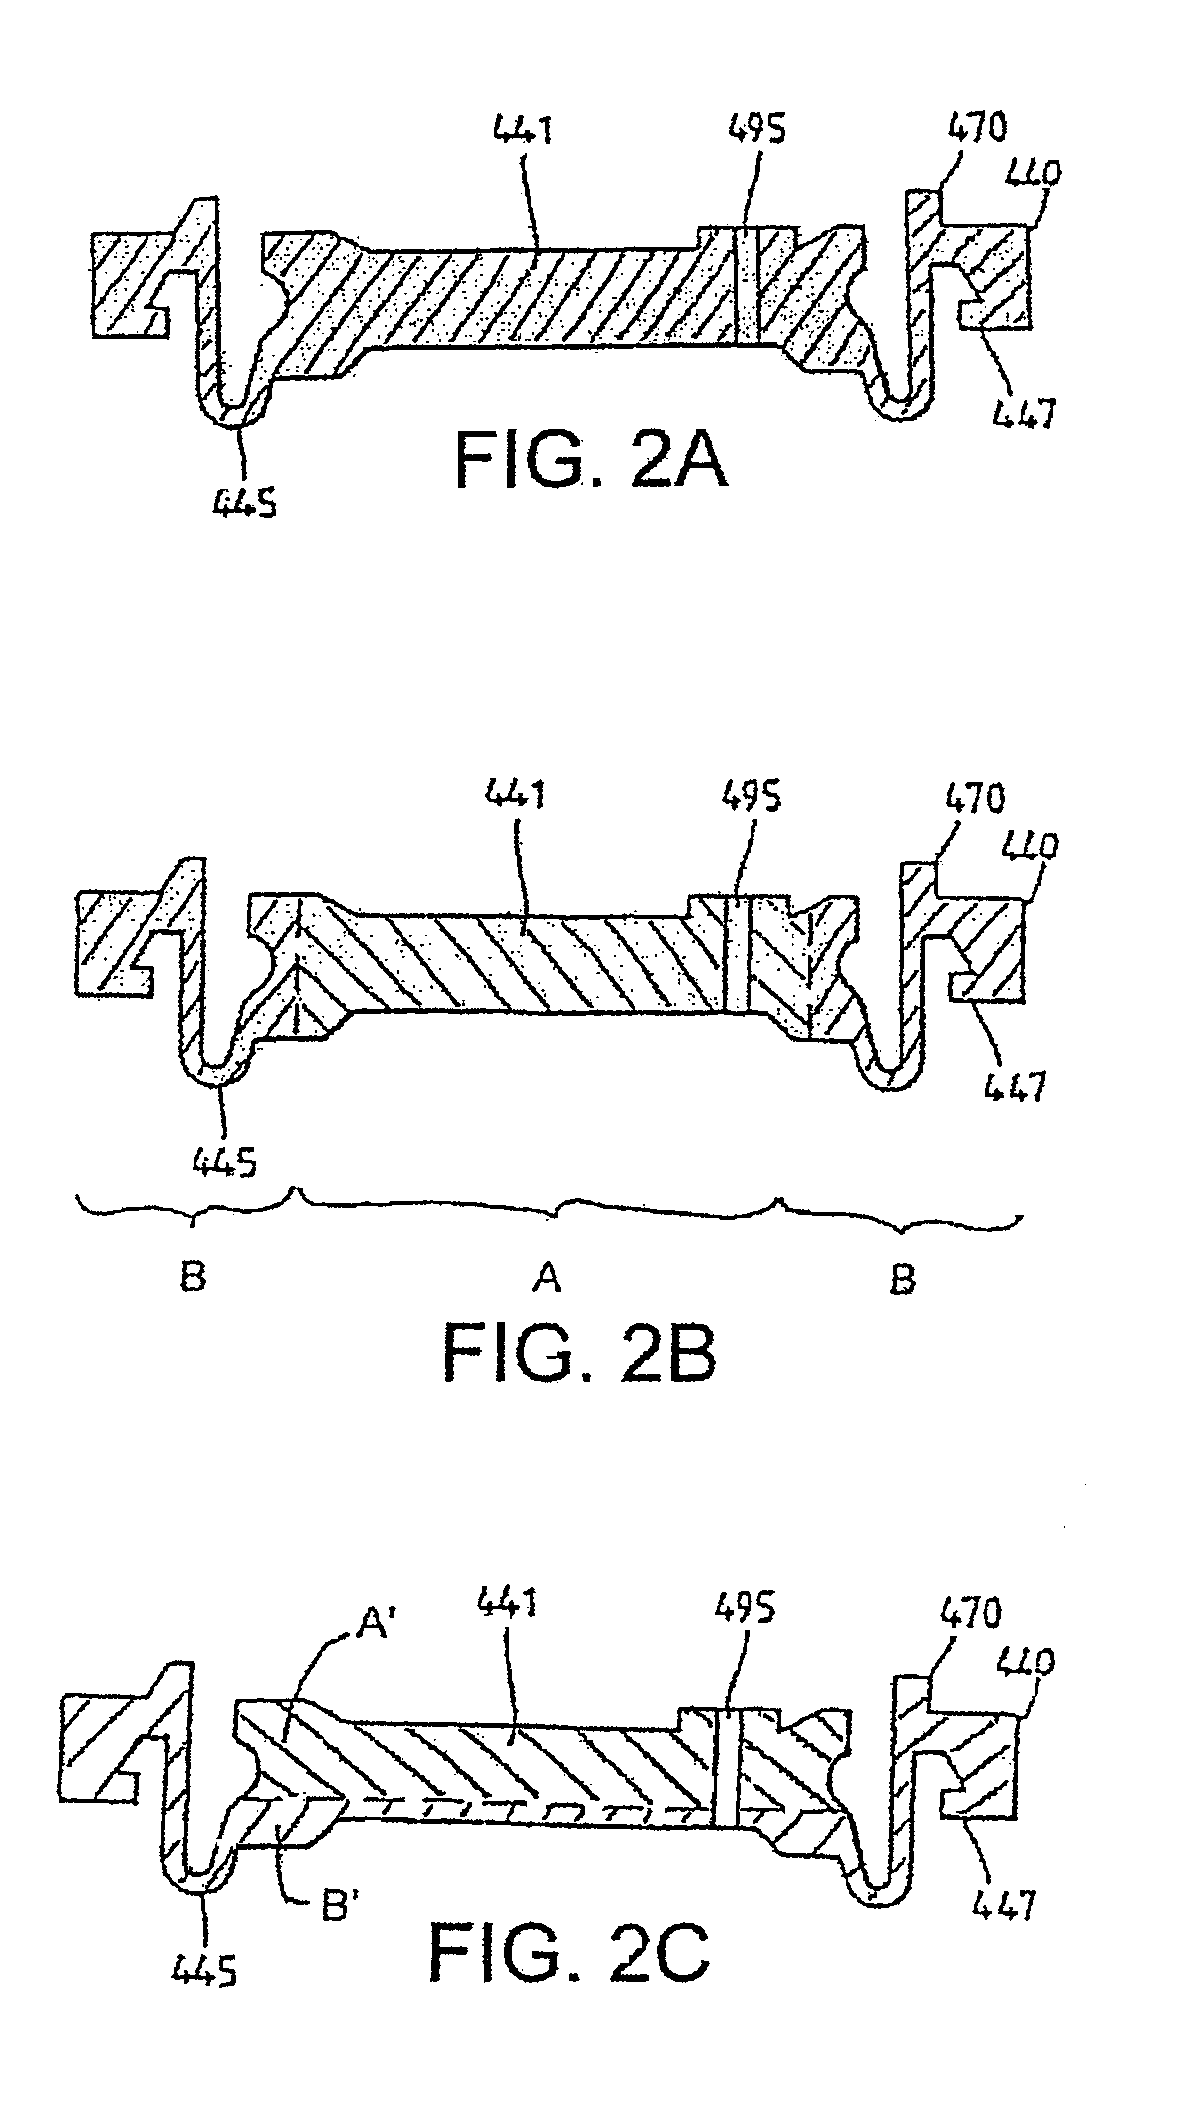 Medicament dispensing device with a display indicative of the state of an internal medicament reservoir